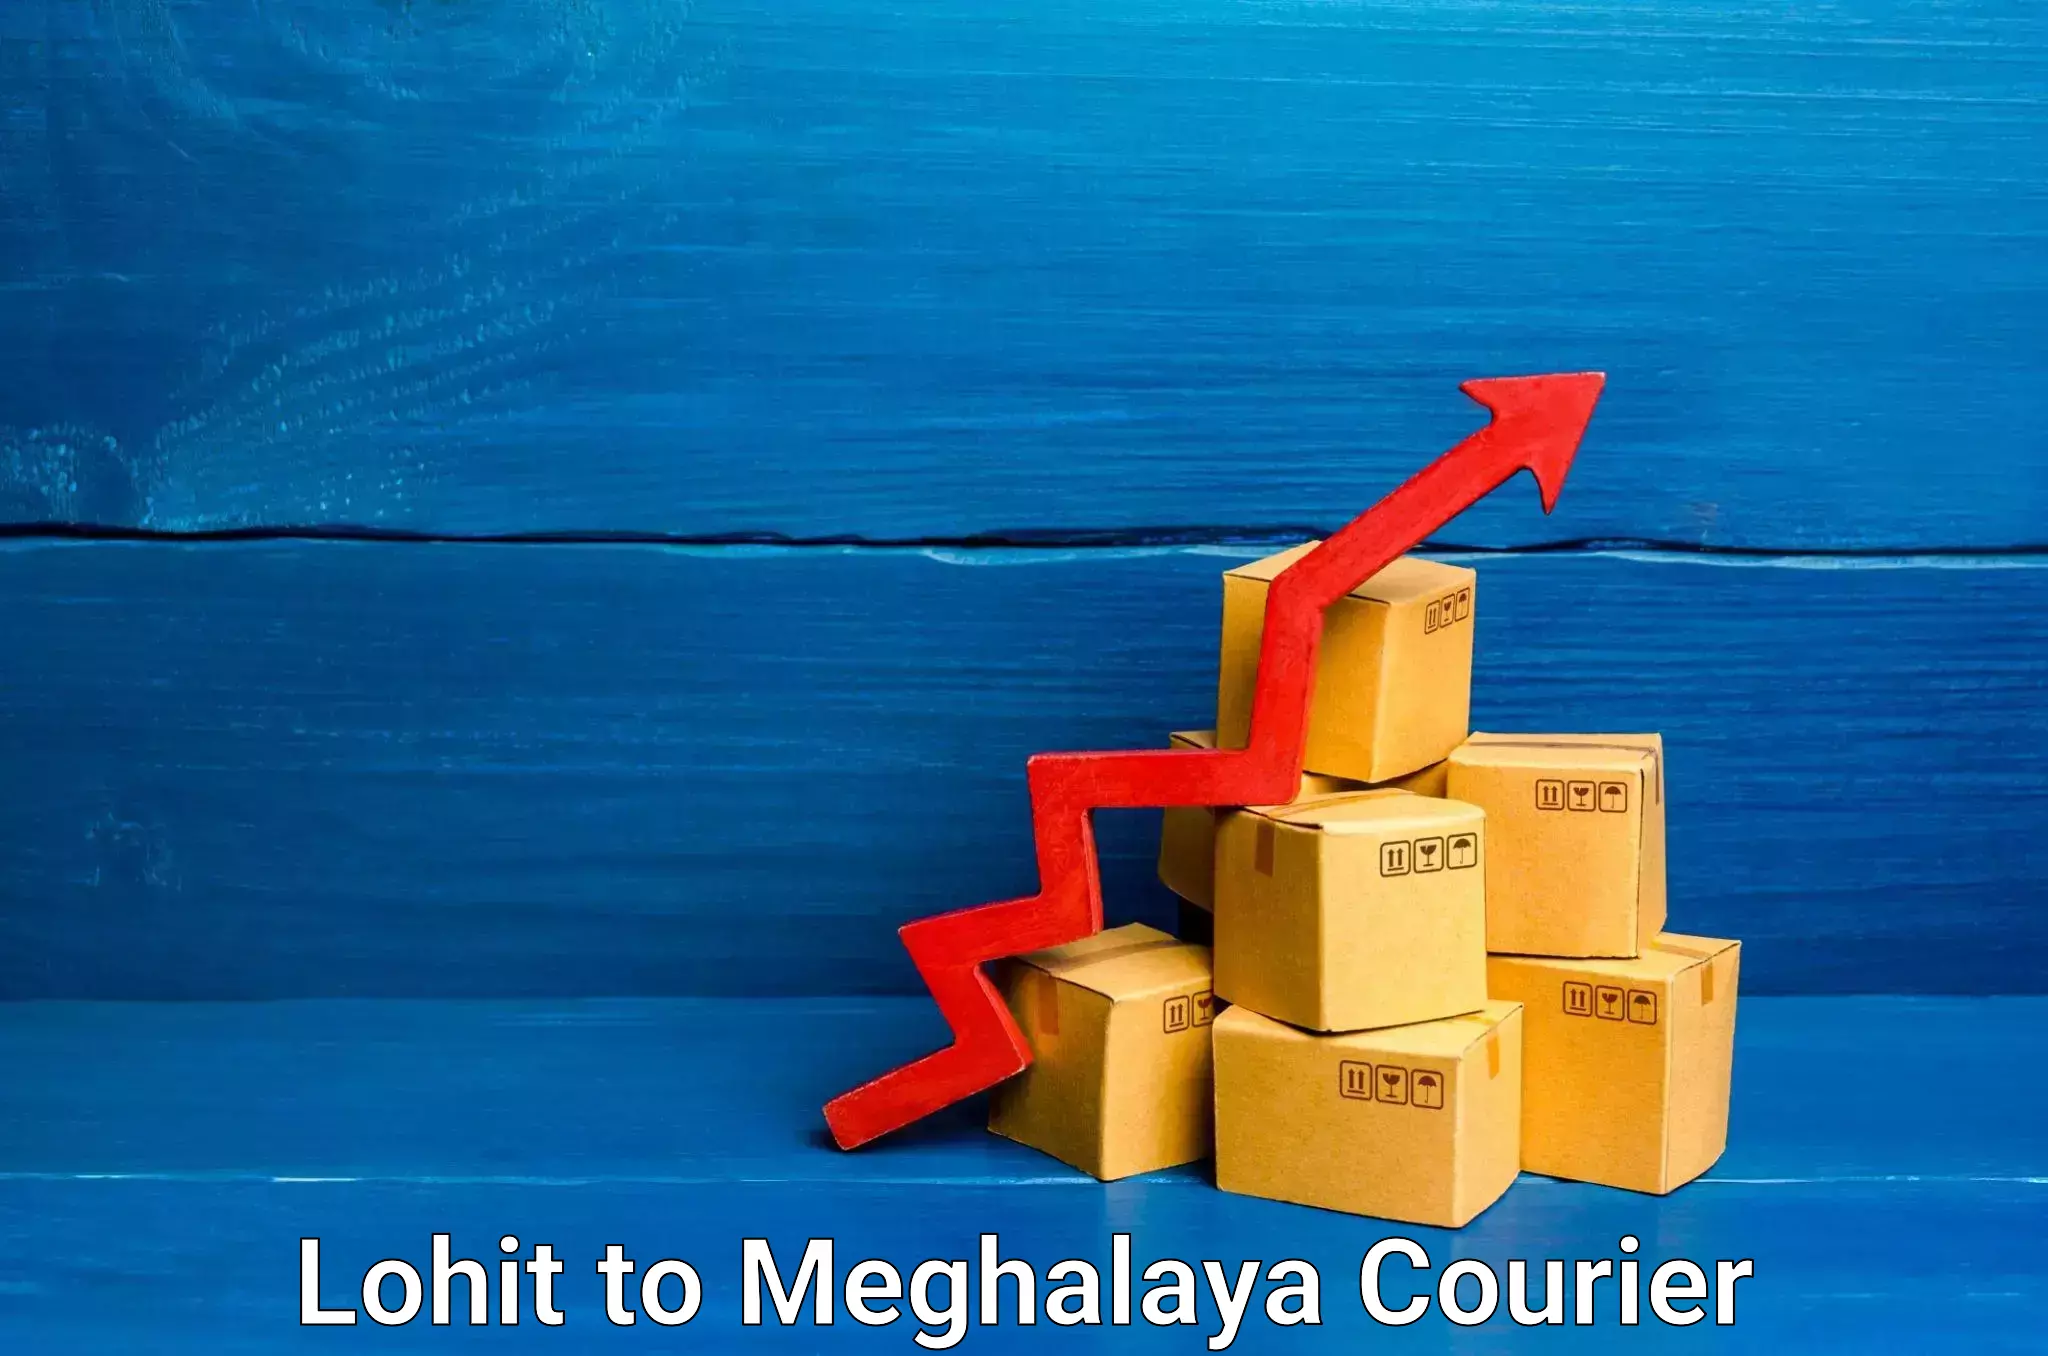 Fast delivery service Lohit to Meghalaya